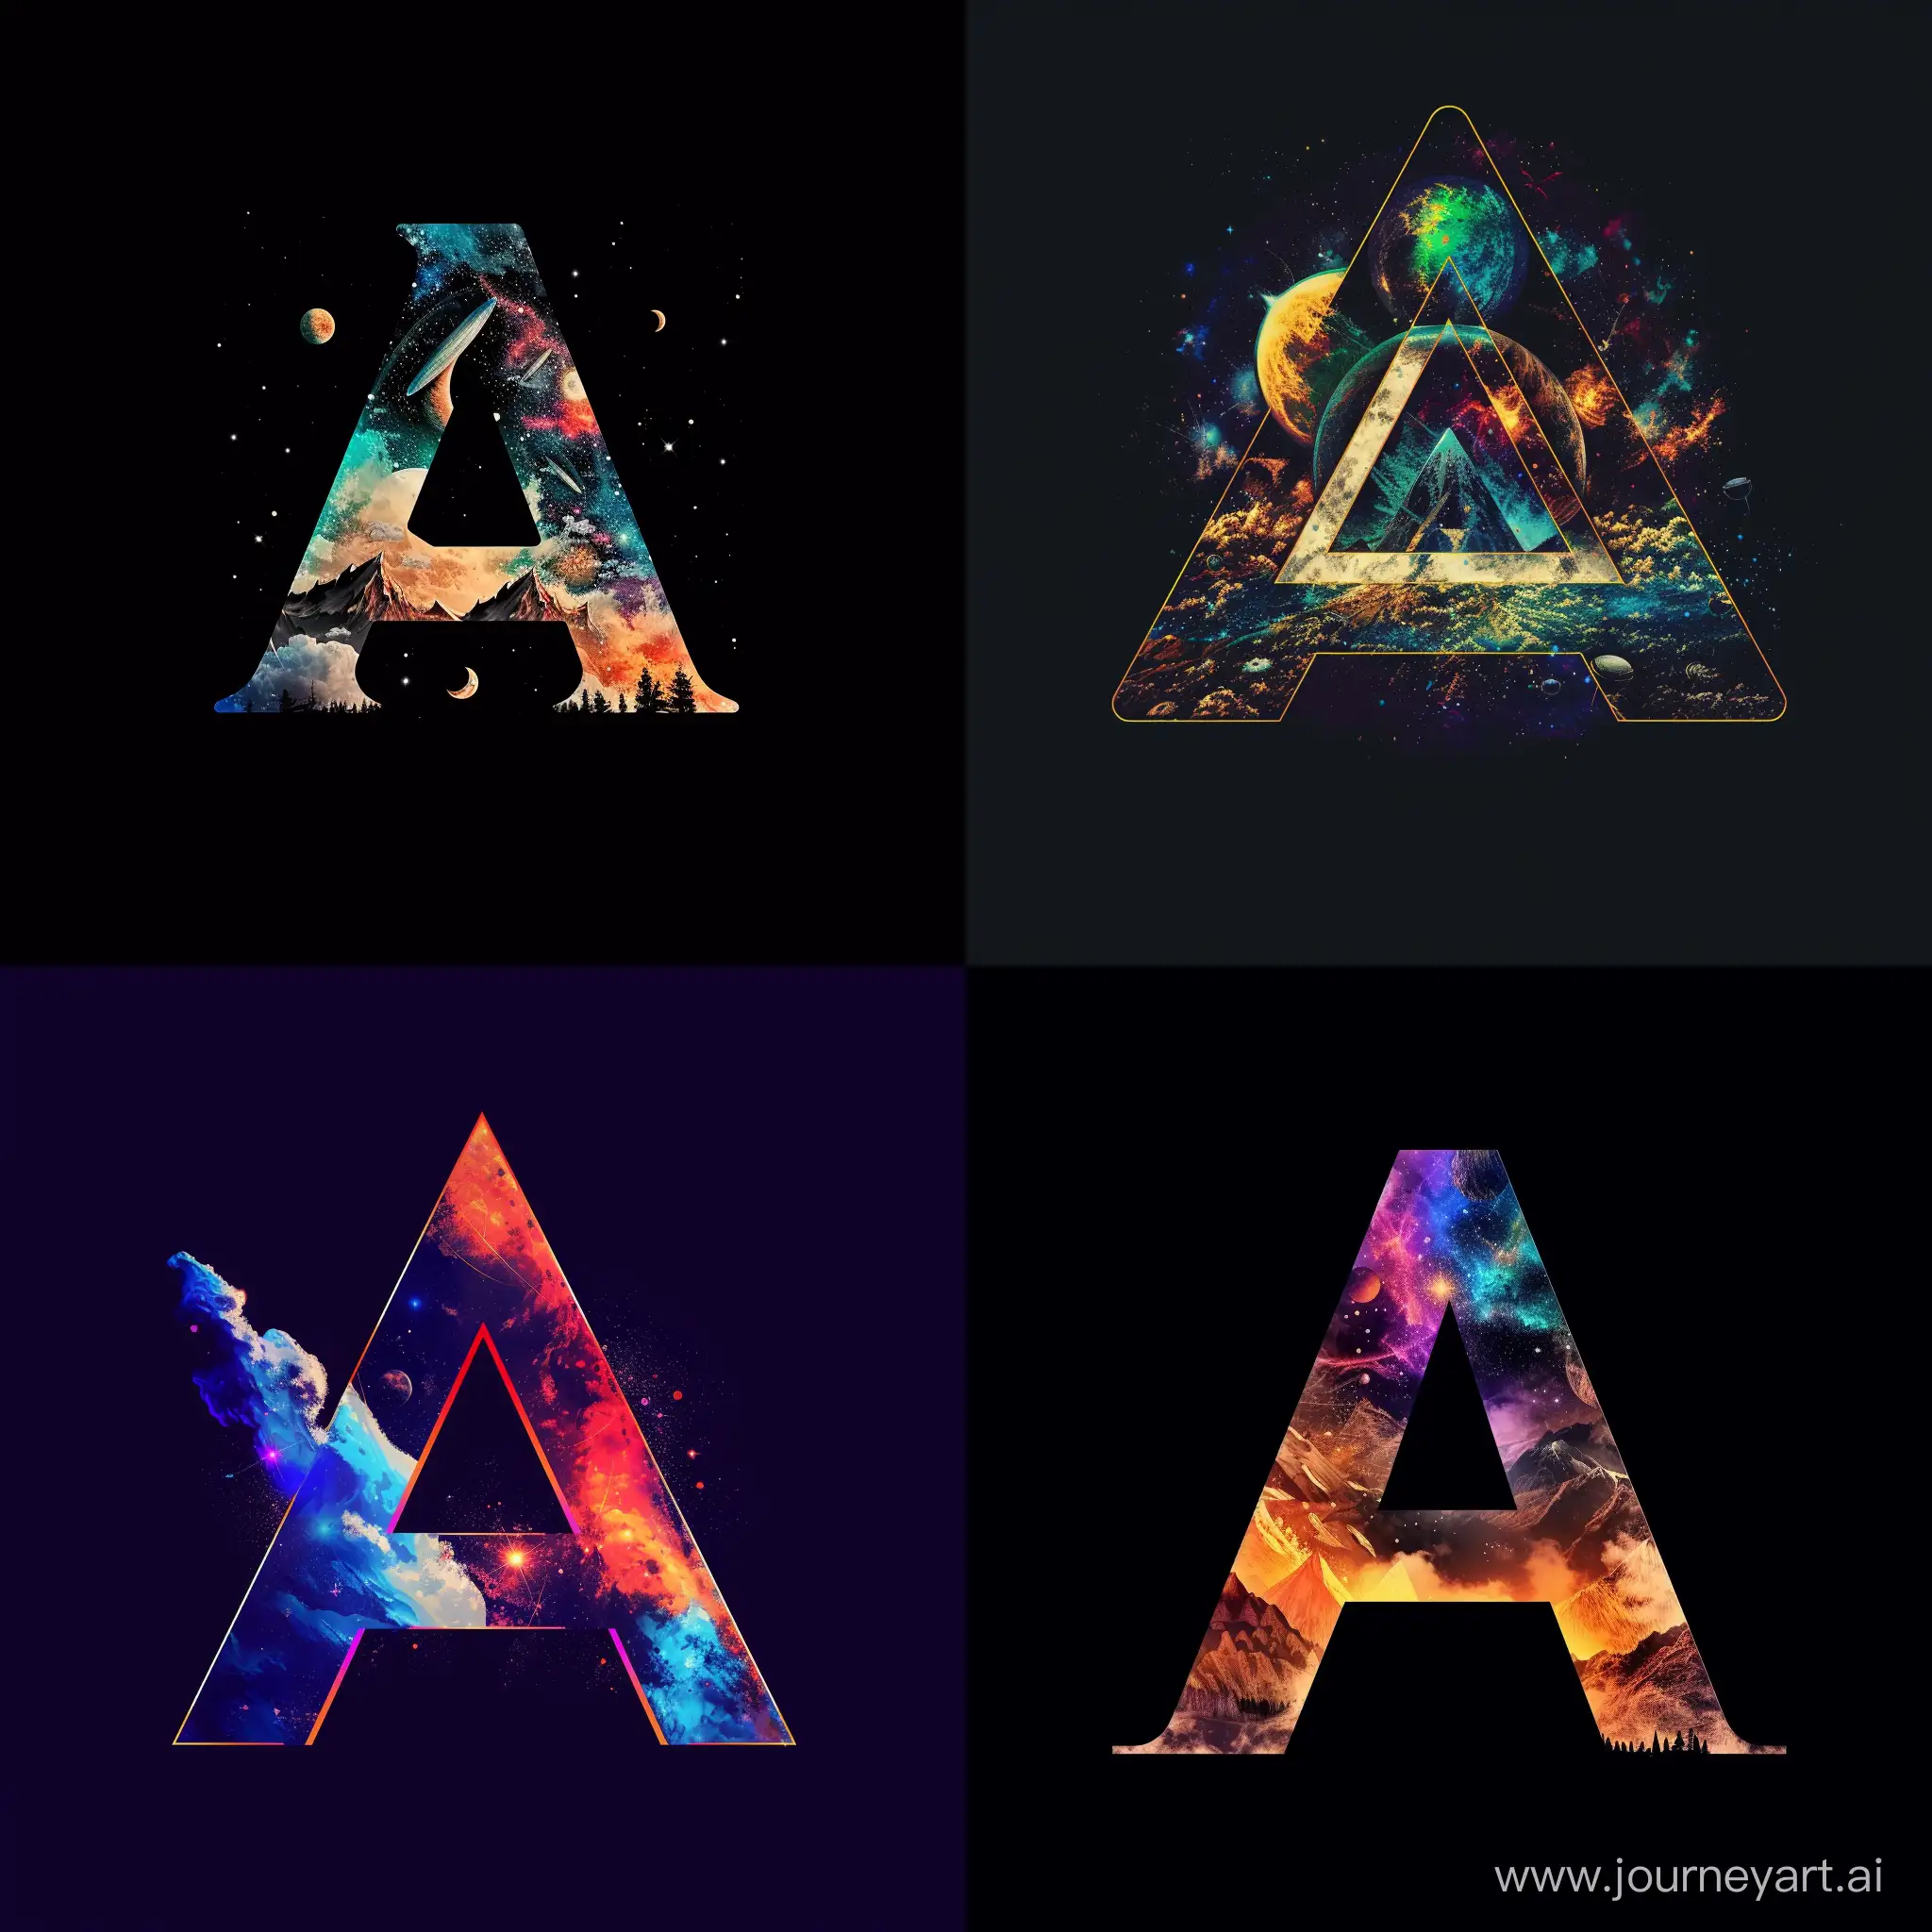 Create a mesmerizing logo using the letter 'A' as the focal point, incorporating dreamlike elements and a hint of darkness. Infuse the design with cosmic colors and artful, surreal imagery to convey the merging of art and fantasy. Emphasize the feeling of enchantment and evoke a sense of wonder and creativity. Let the logo exude an otherworldly and mystical aura that captures the essence of dreams and imaginative escape